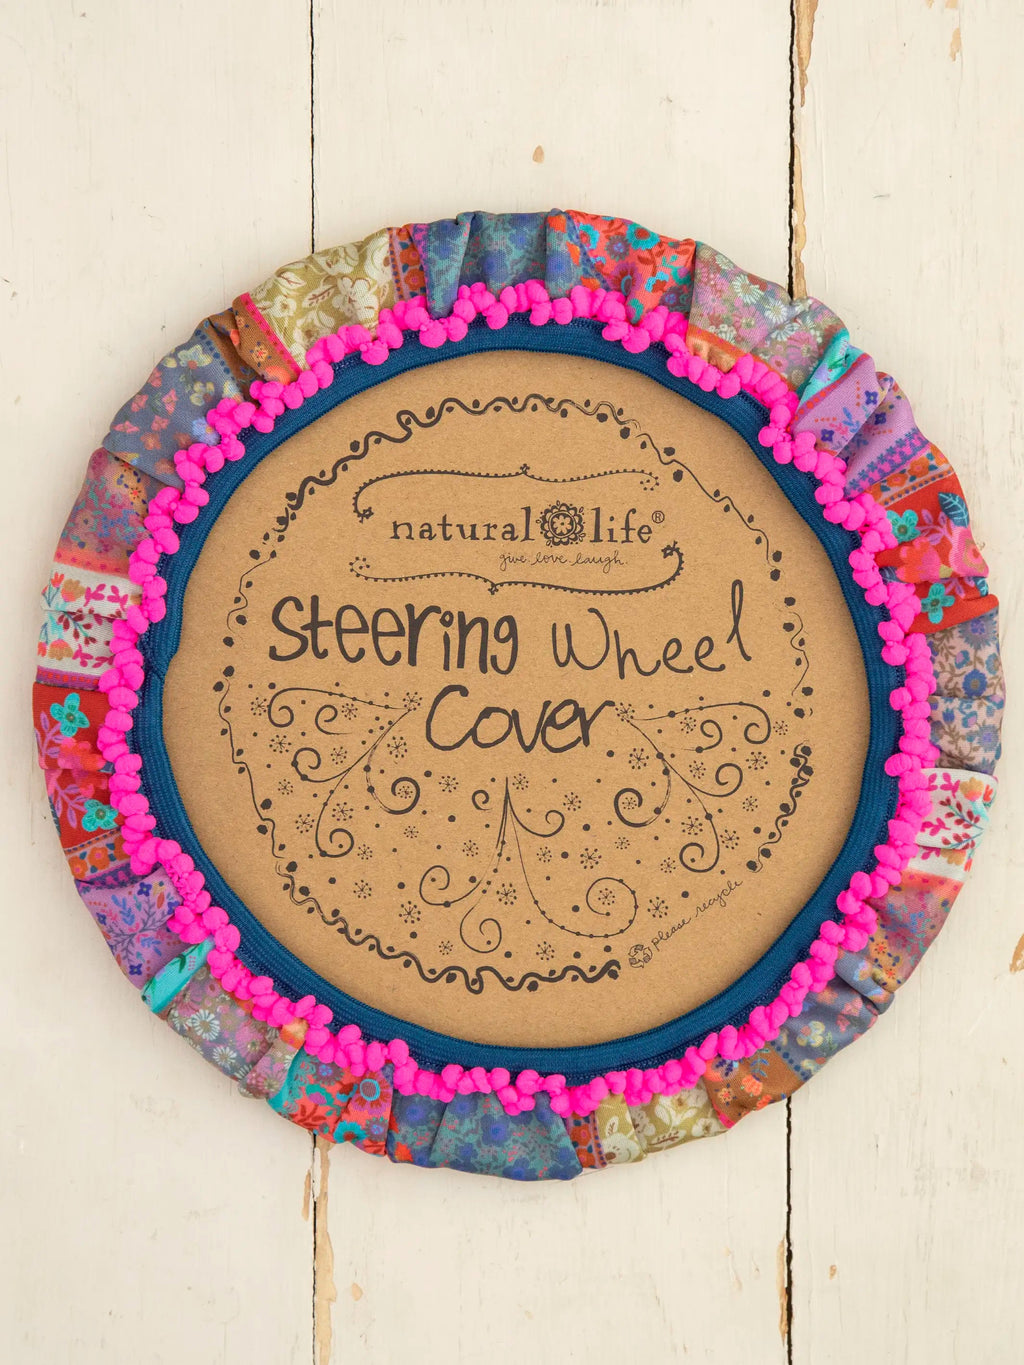 Natural Life Steering Wheel Cover - Patchwork